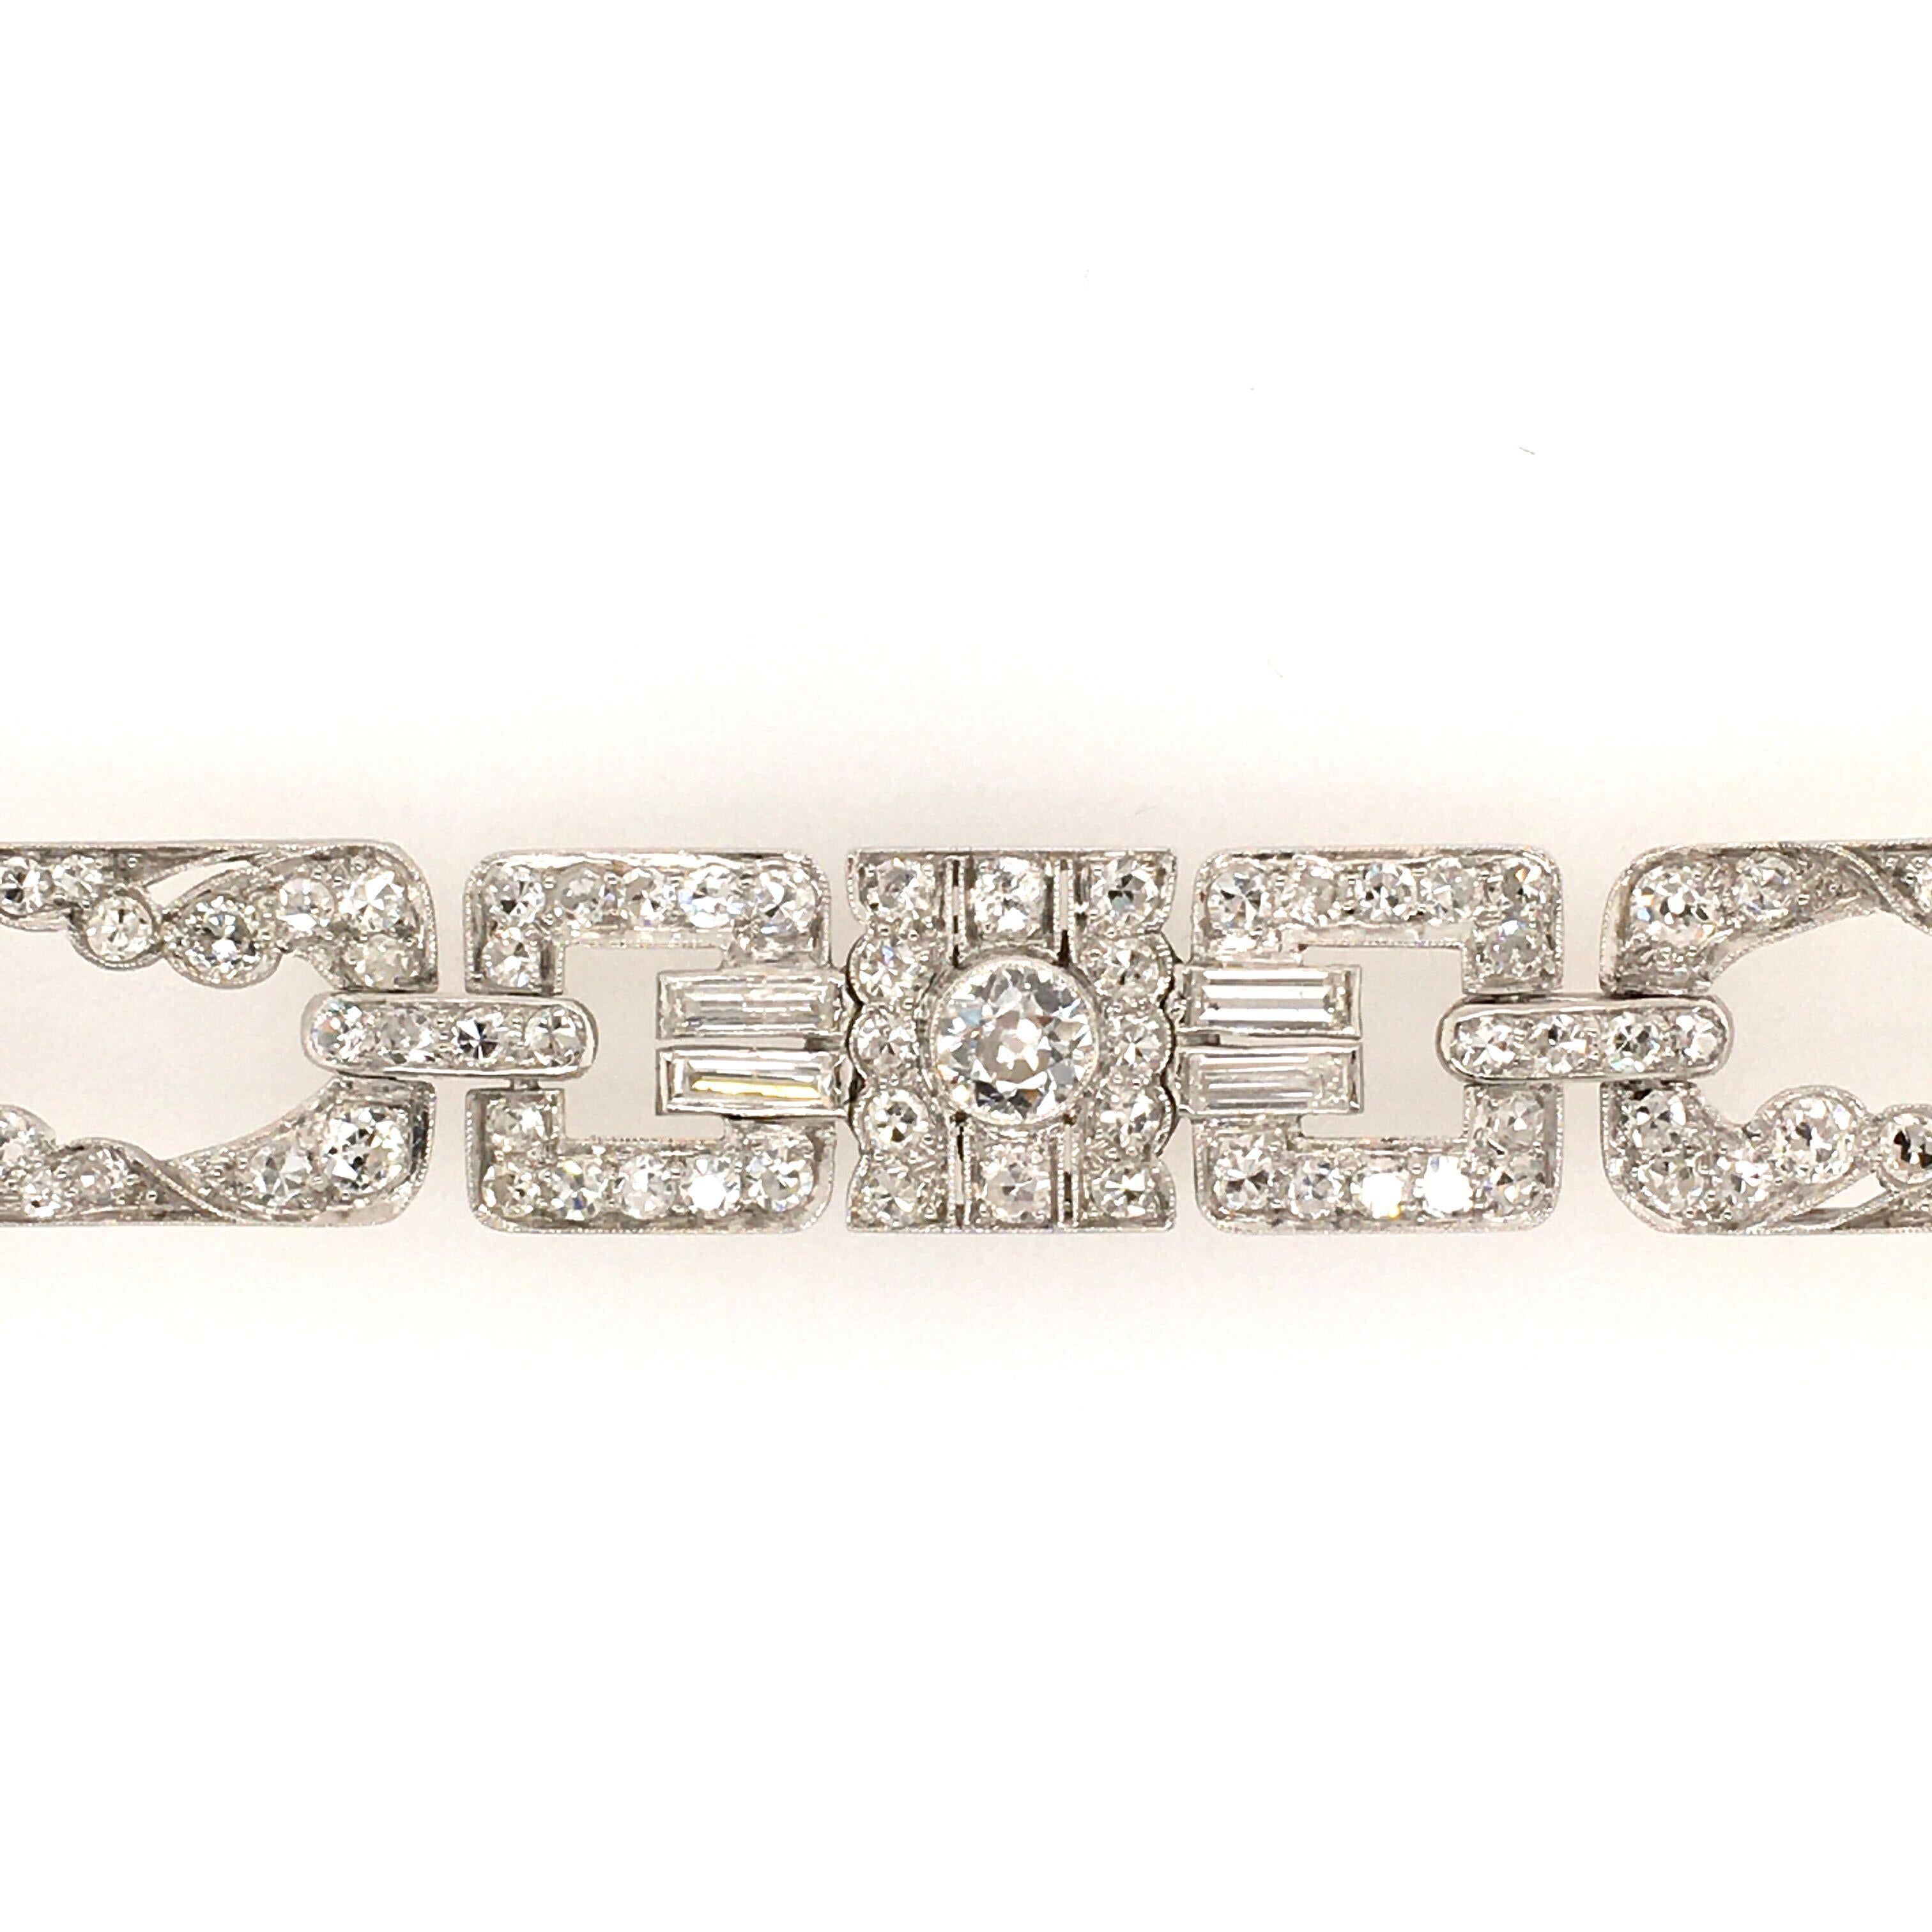 An Art Deco platinum and diamond bracelet.  Circa, 1930.  The bracelet is composed of three panels of geometric design set with the following:  1 Old European cut diamond weighing approximately .45 carat, 2 Old European cut diamonds each weighing